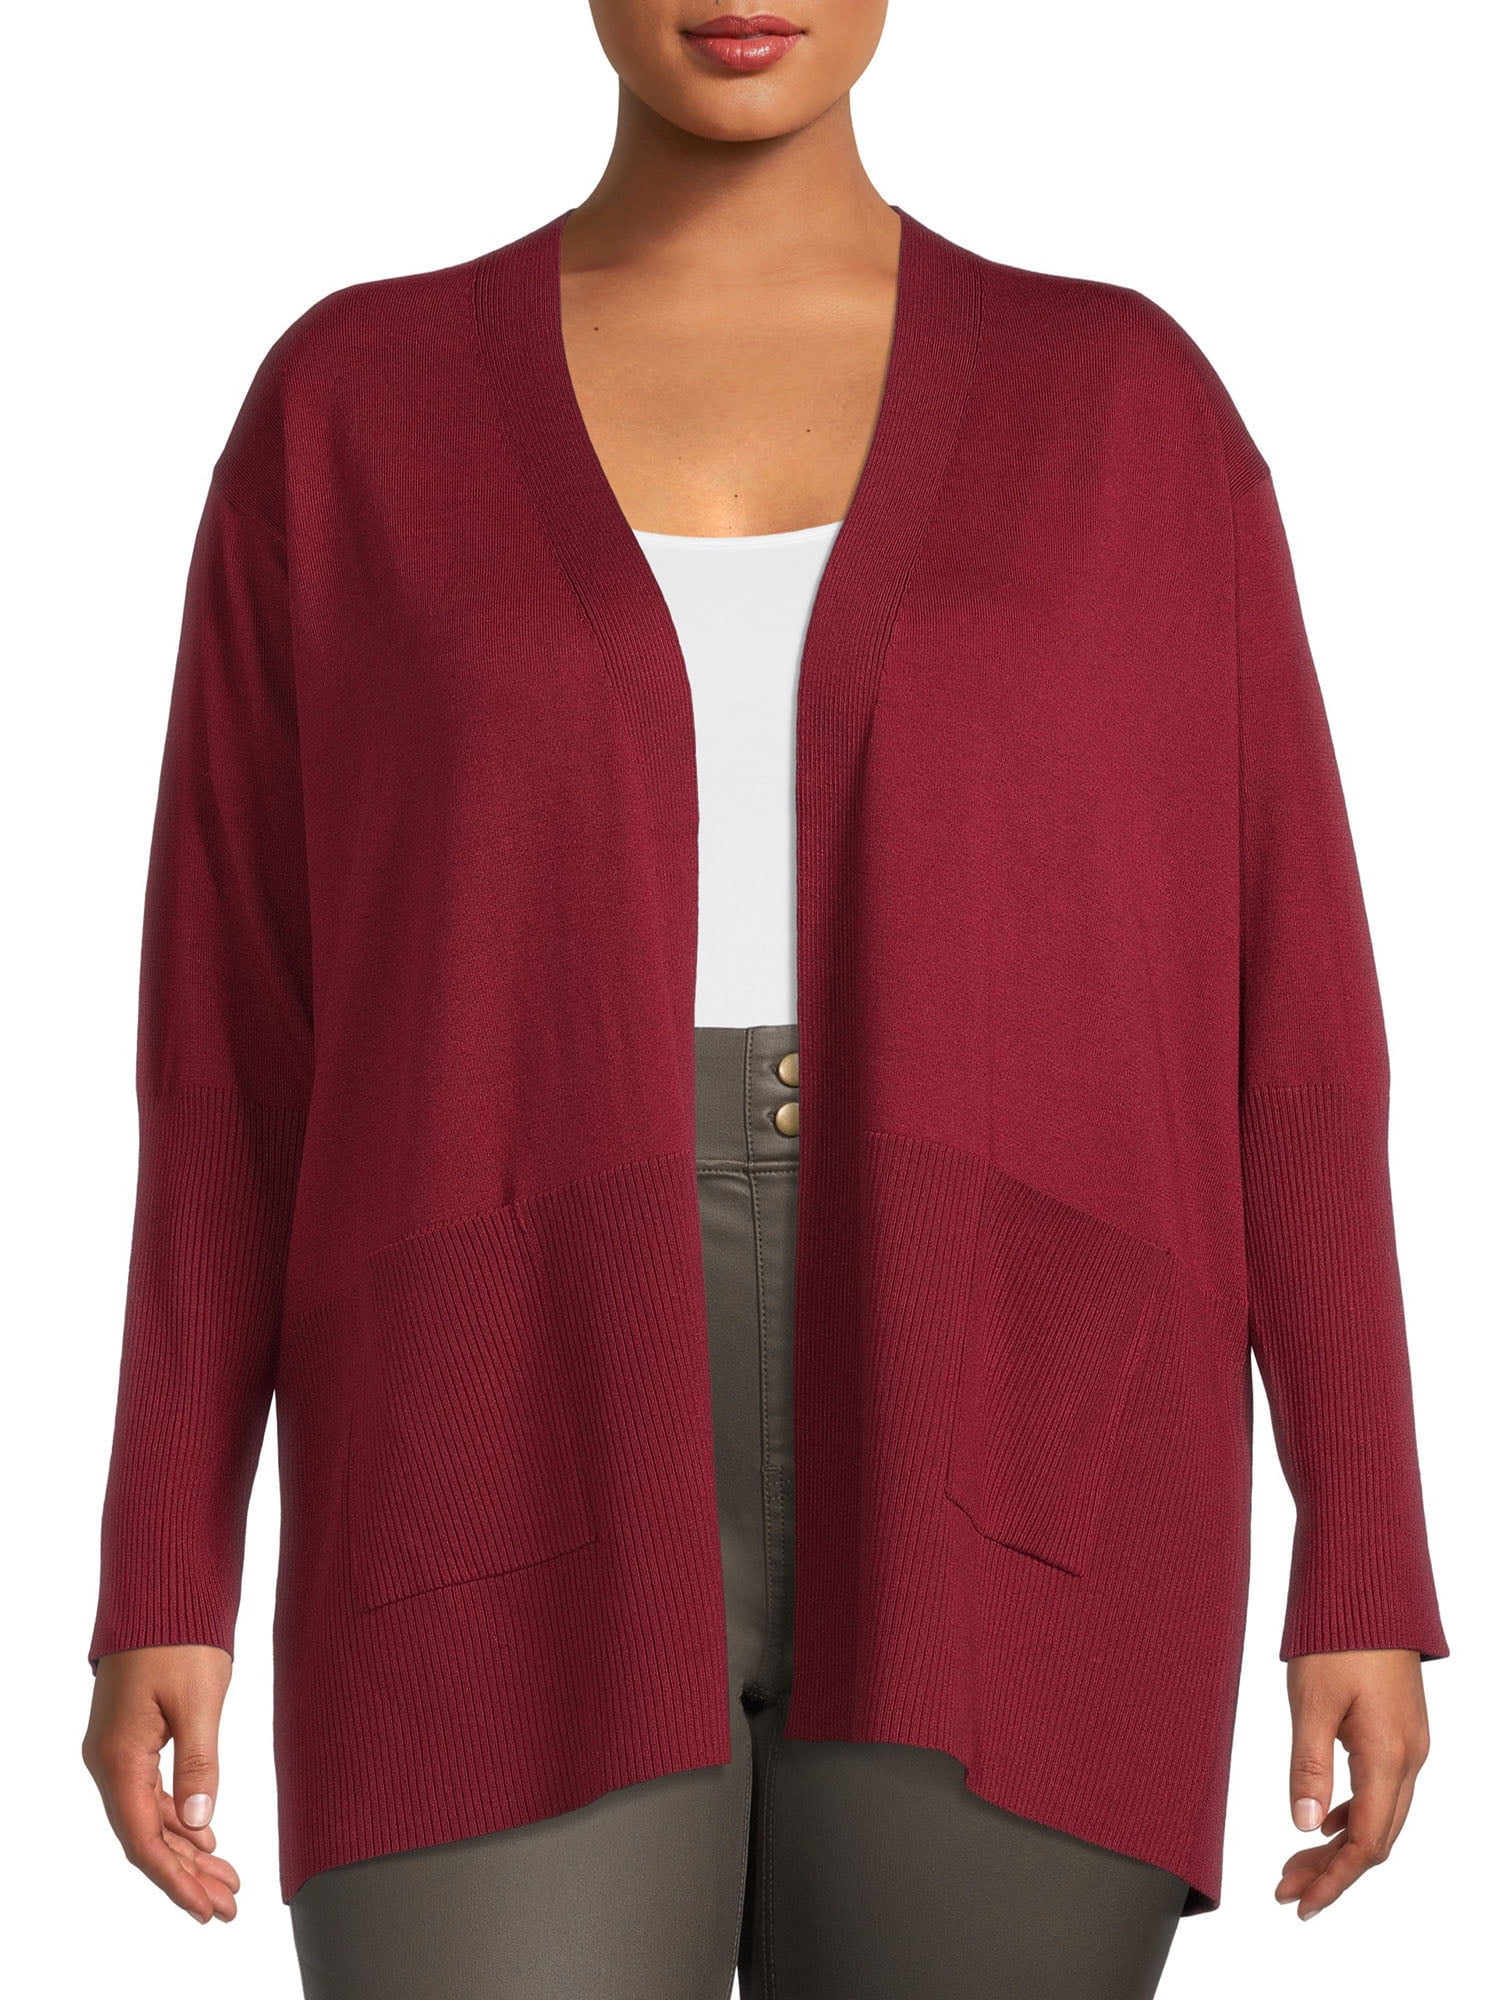 terra & sky cardigan - OFF-60% >Free Delivery